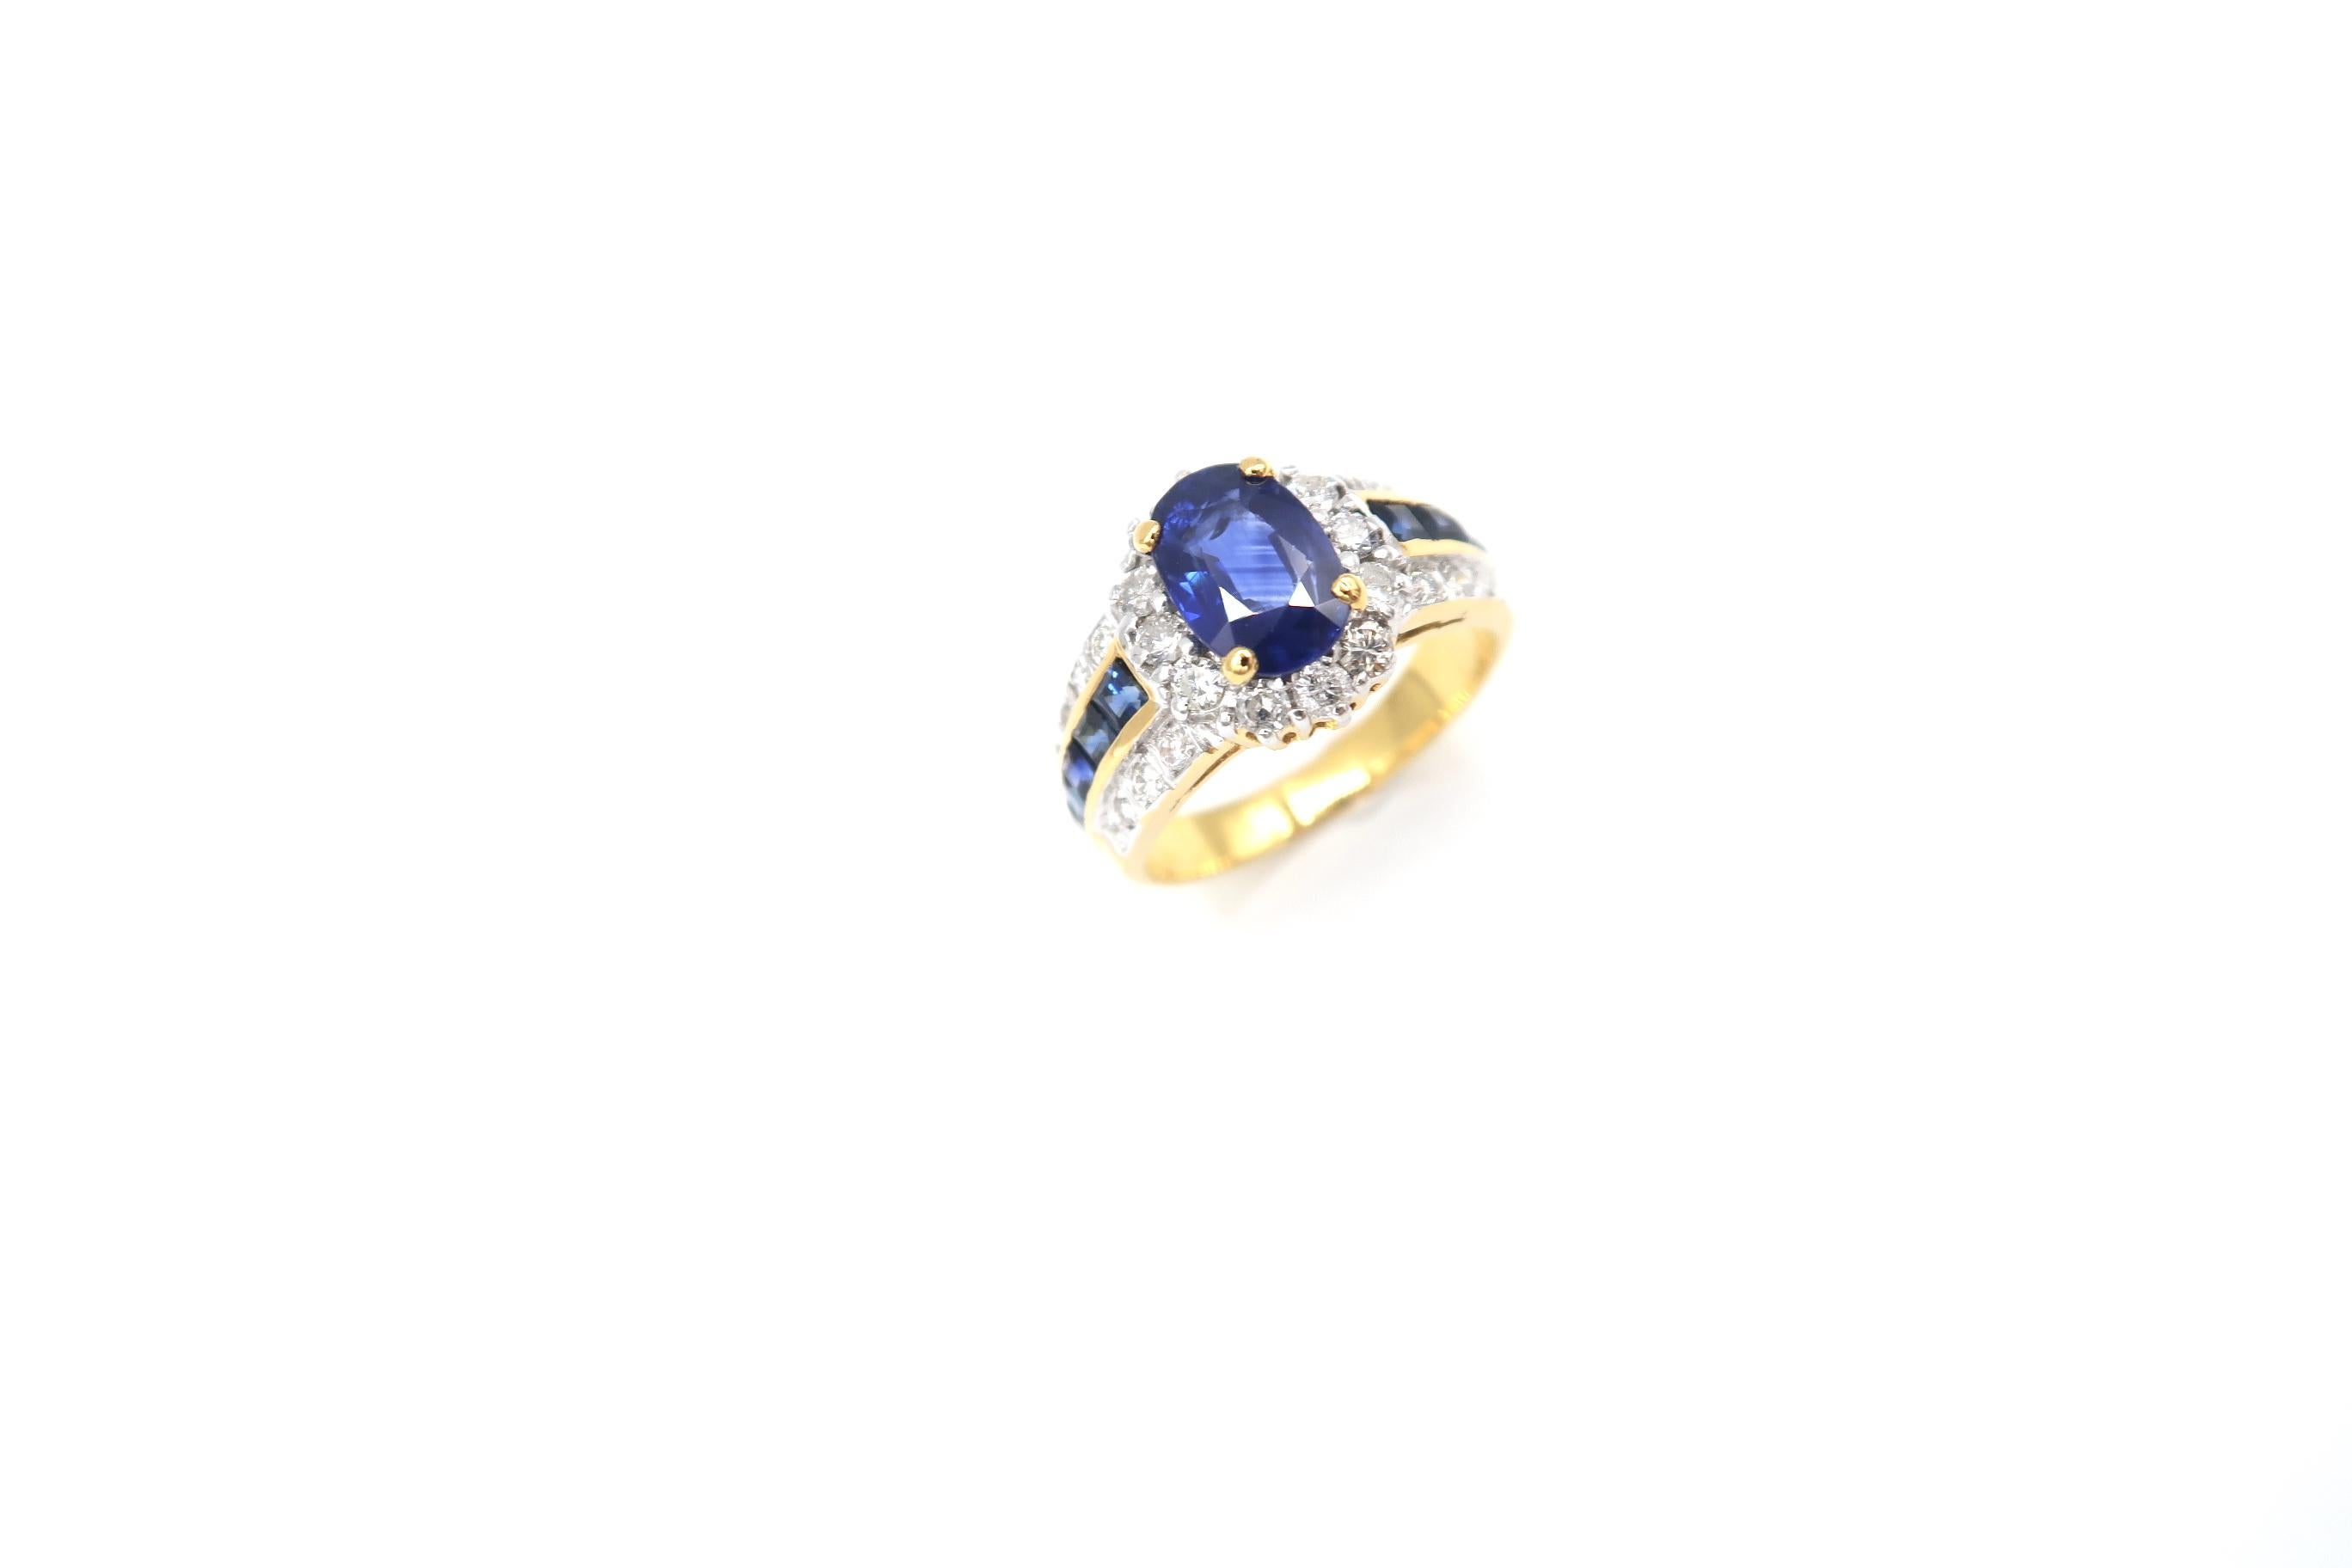 1.80 Carat Oval Sapphire and Diamond Halo 18K Gold Ring with Lined Princess-Cut Sapphire and Diamond Band 

Ring size: 55

Sapphire: Centre 1.80ct.
Sapphire: 0.80ct.
Diamond: 0.80ct.
Gold: 18K 6.20g.